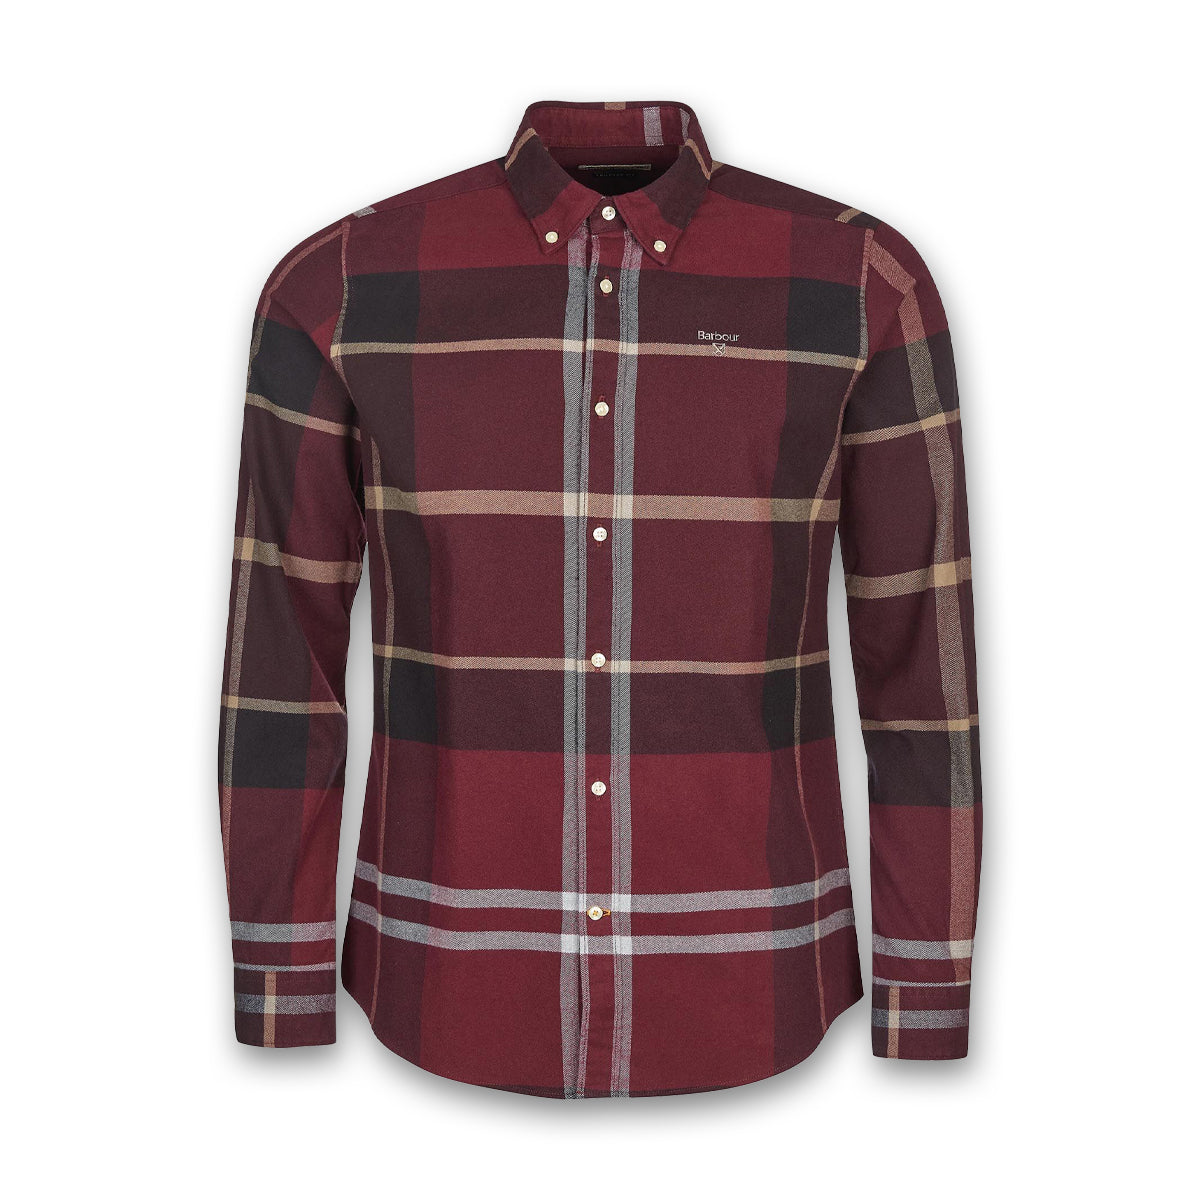 Barbour - Iceloch TF Shirt in Winter Red | Nigel Clare